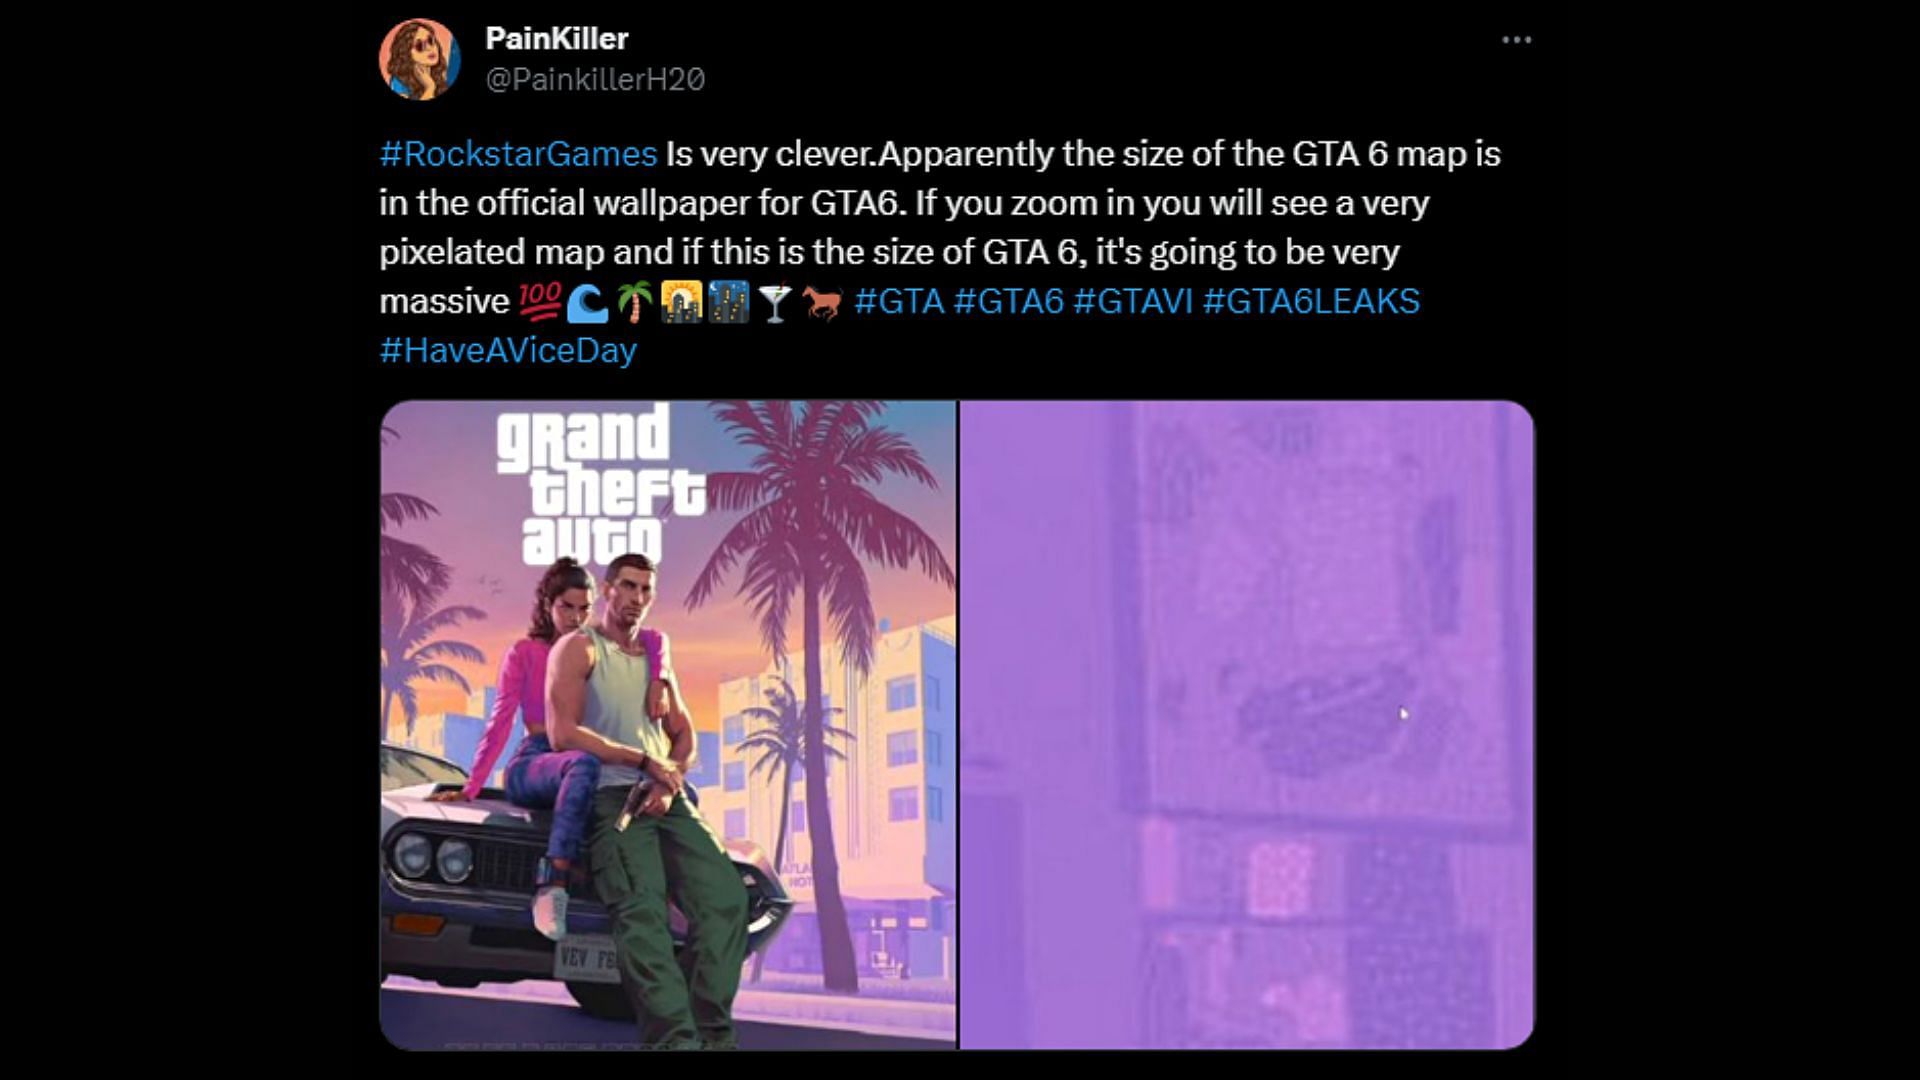 There seems to be a hidden map in the official Grand Theft Auto 6 wallpaper (Image via X/@PainkillerH20)